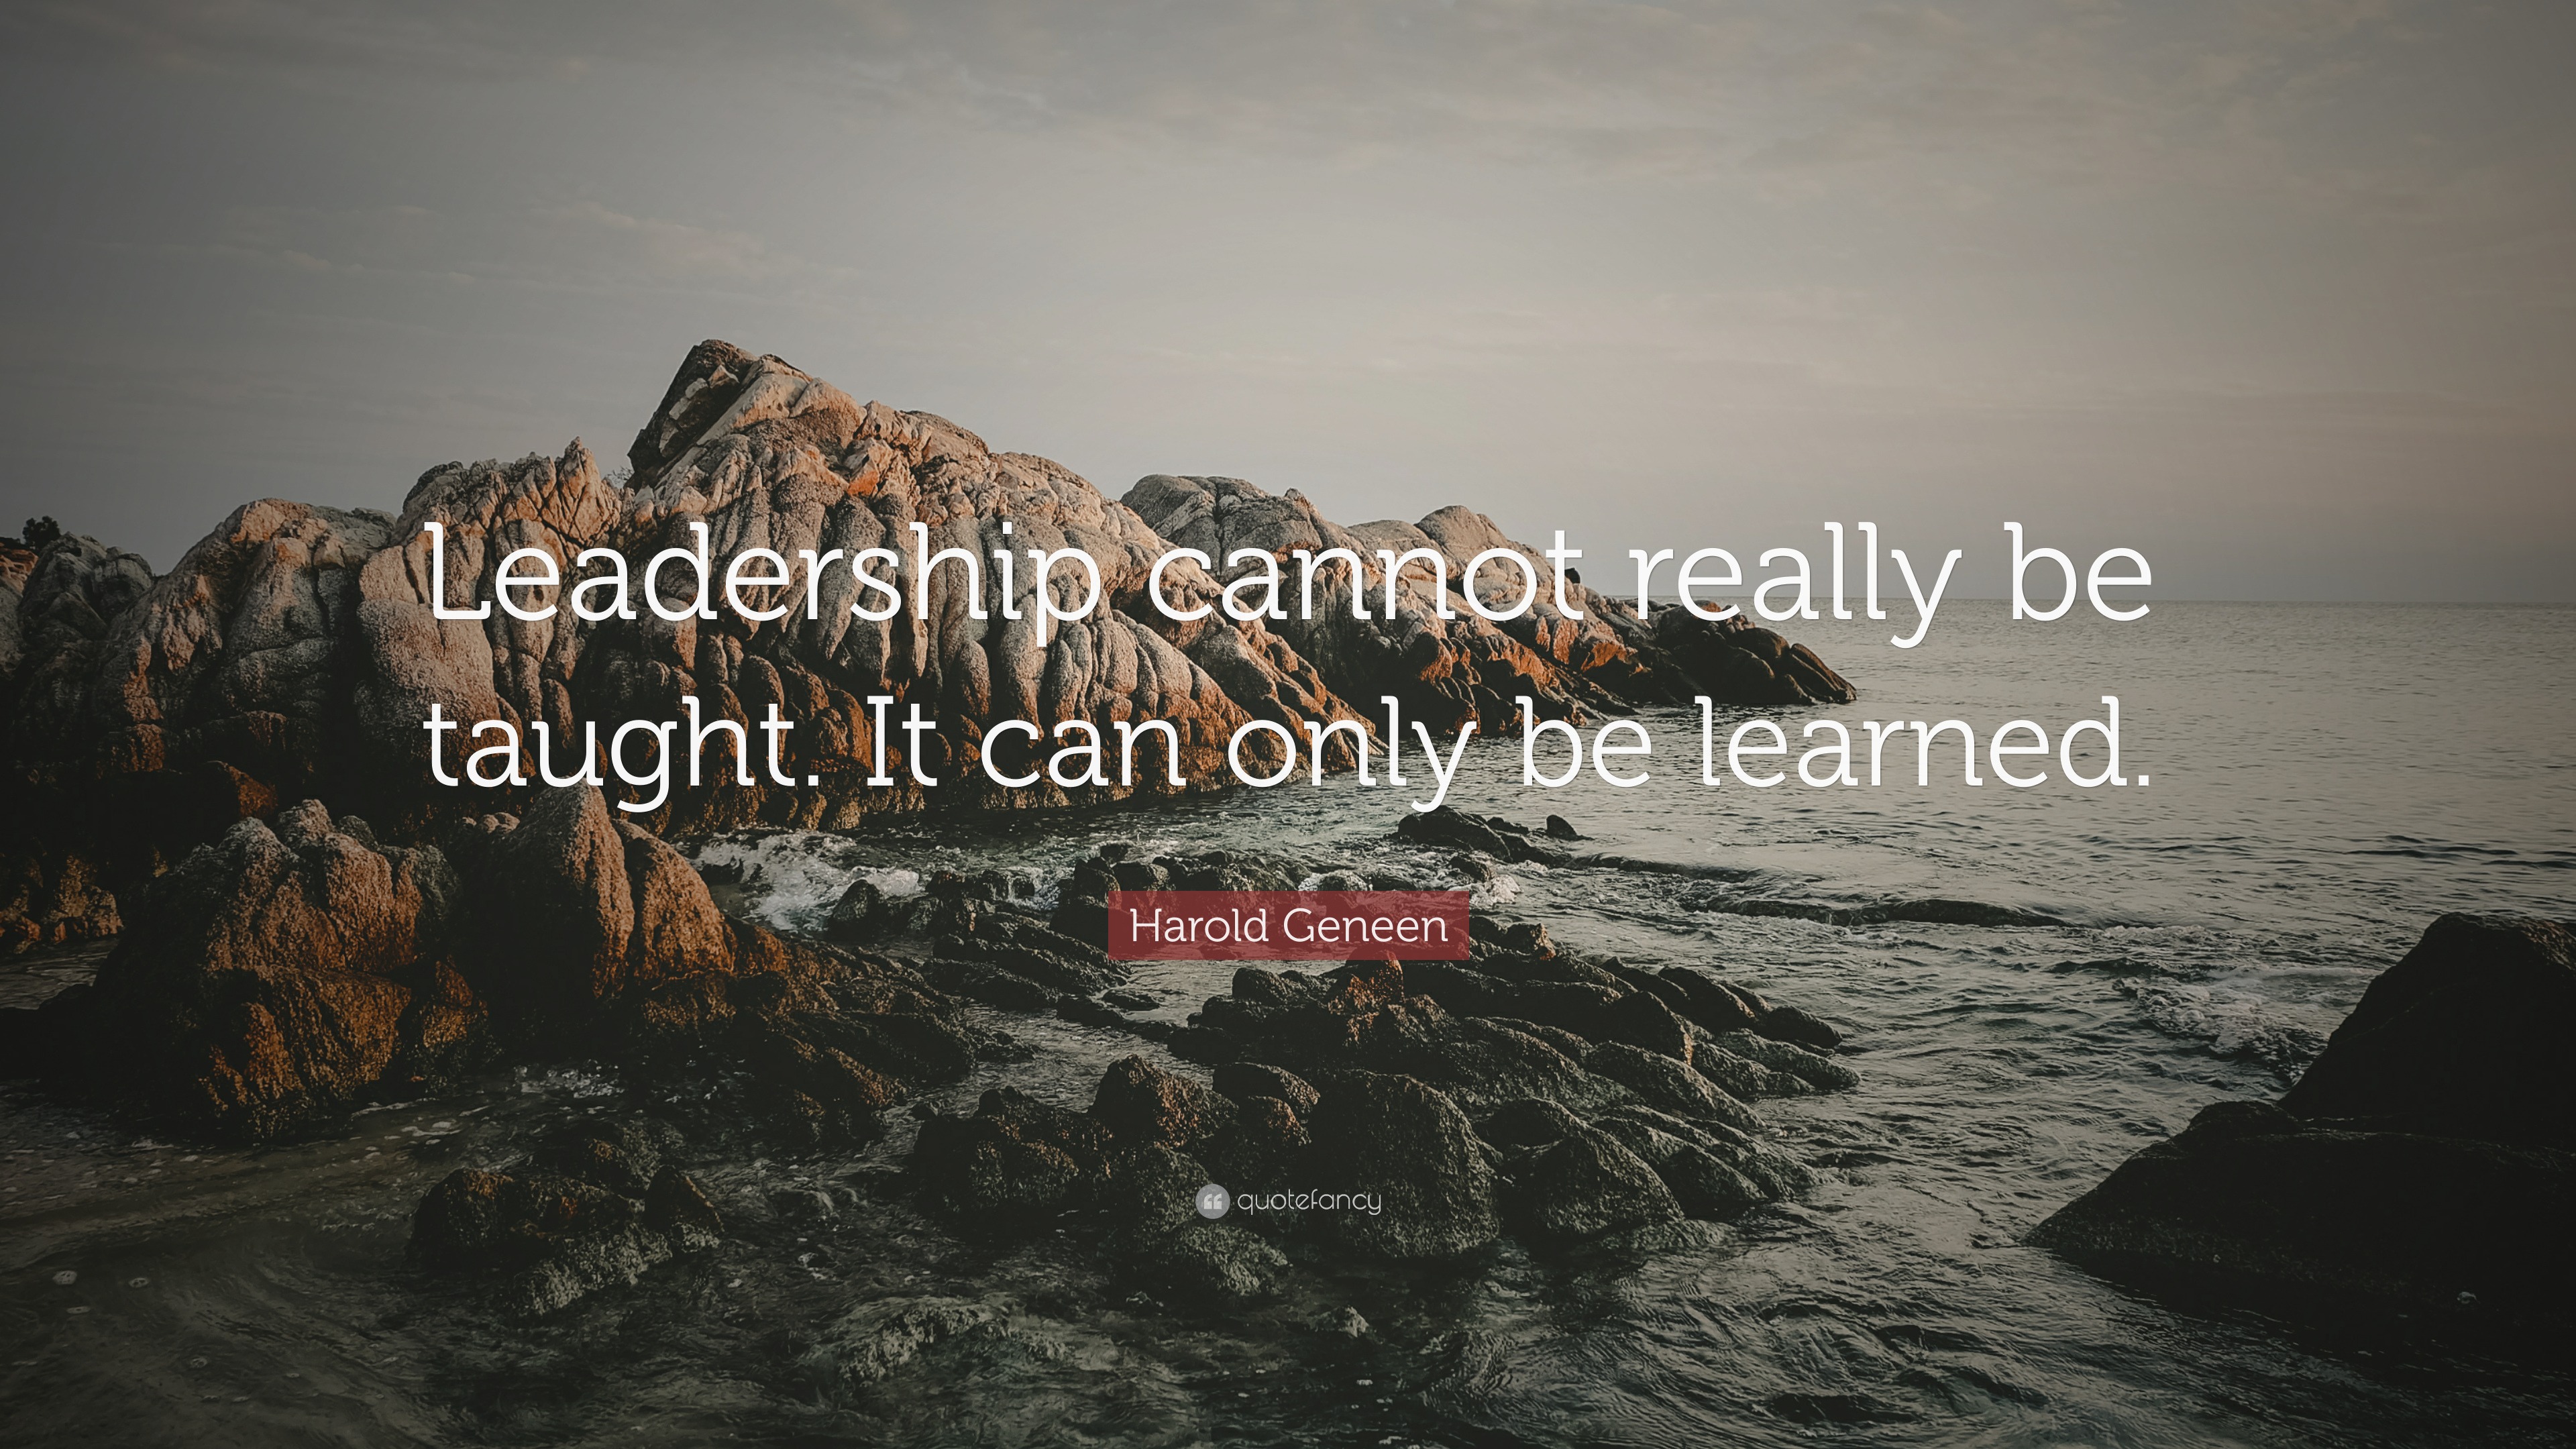 essay on leadership cannot be taught